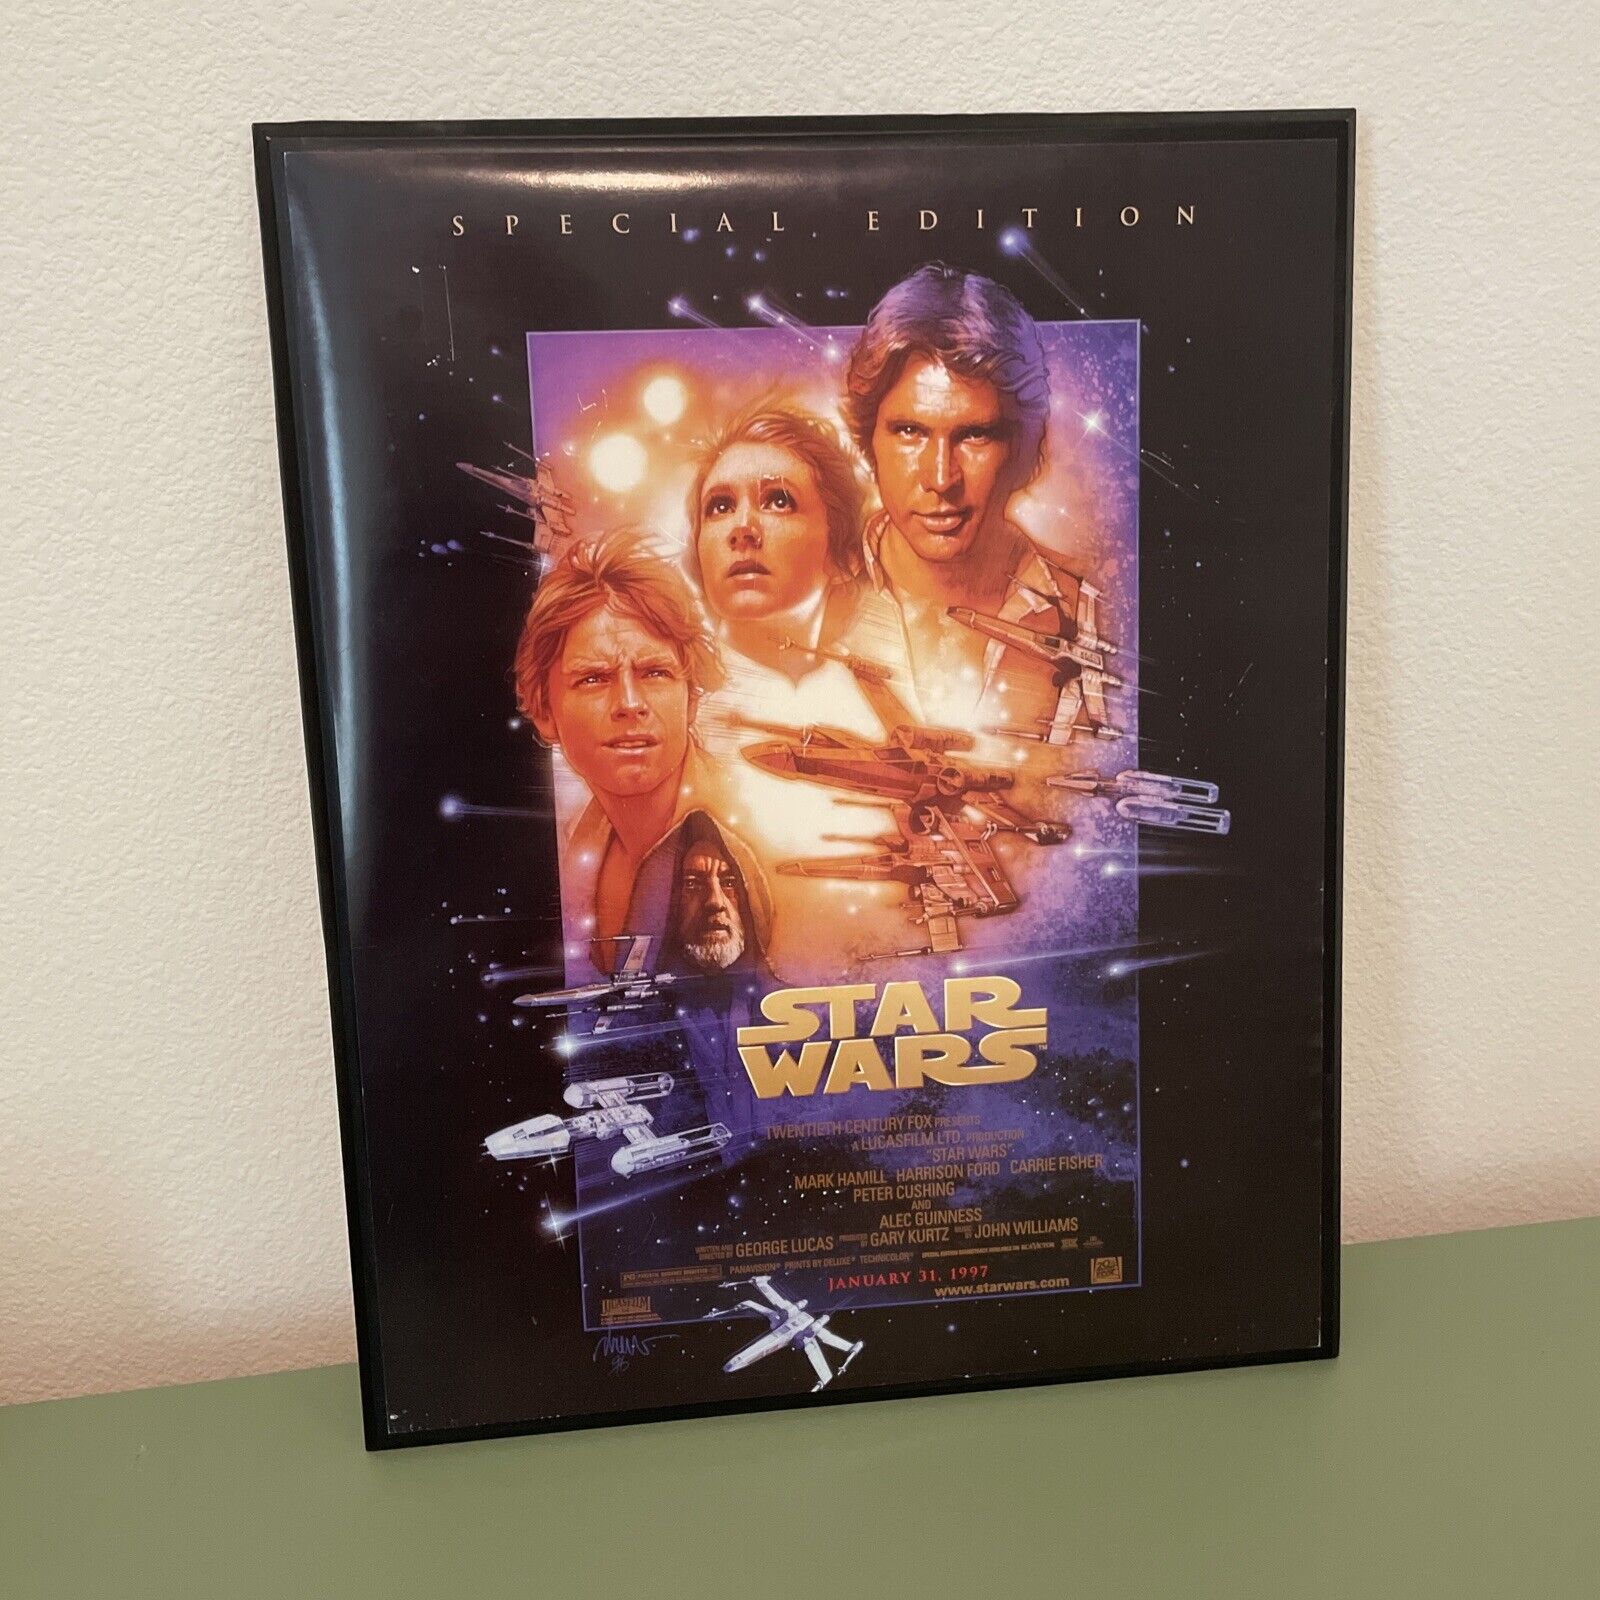 1997 Star Wars Original Special Edition Movie Poster 20 X 16 A New Hope version